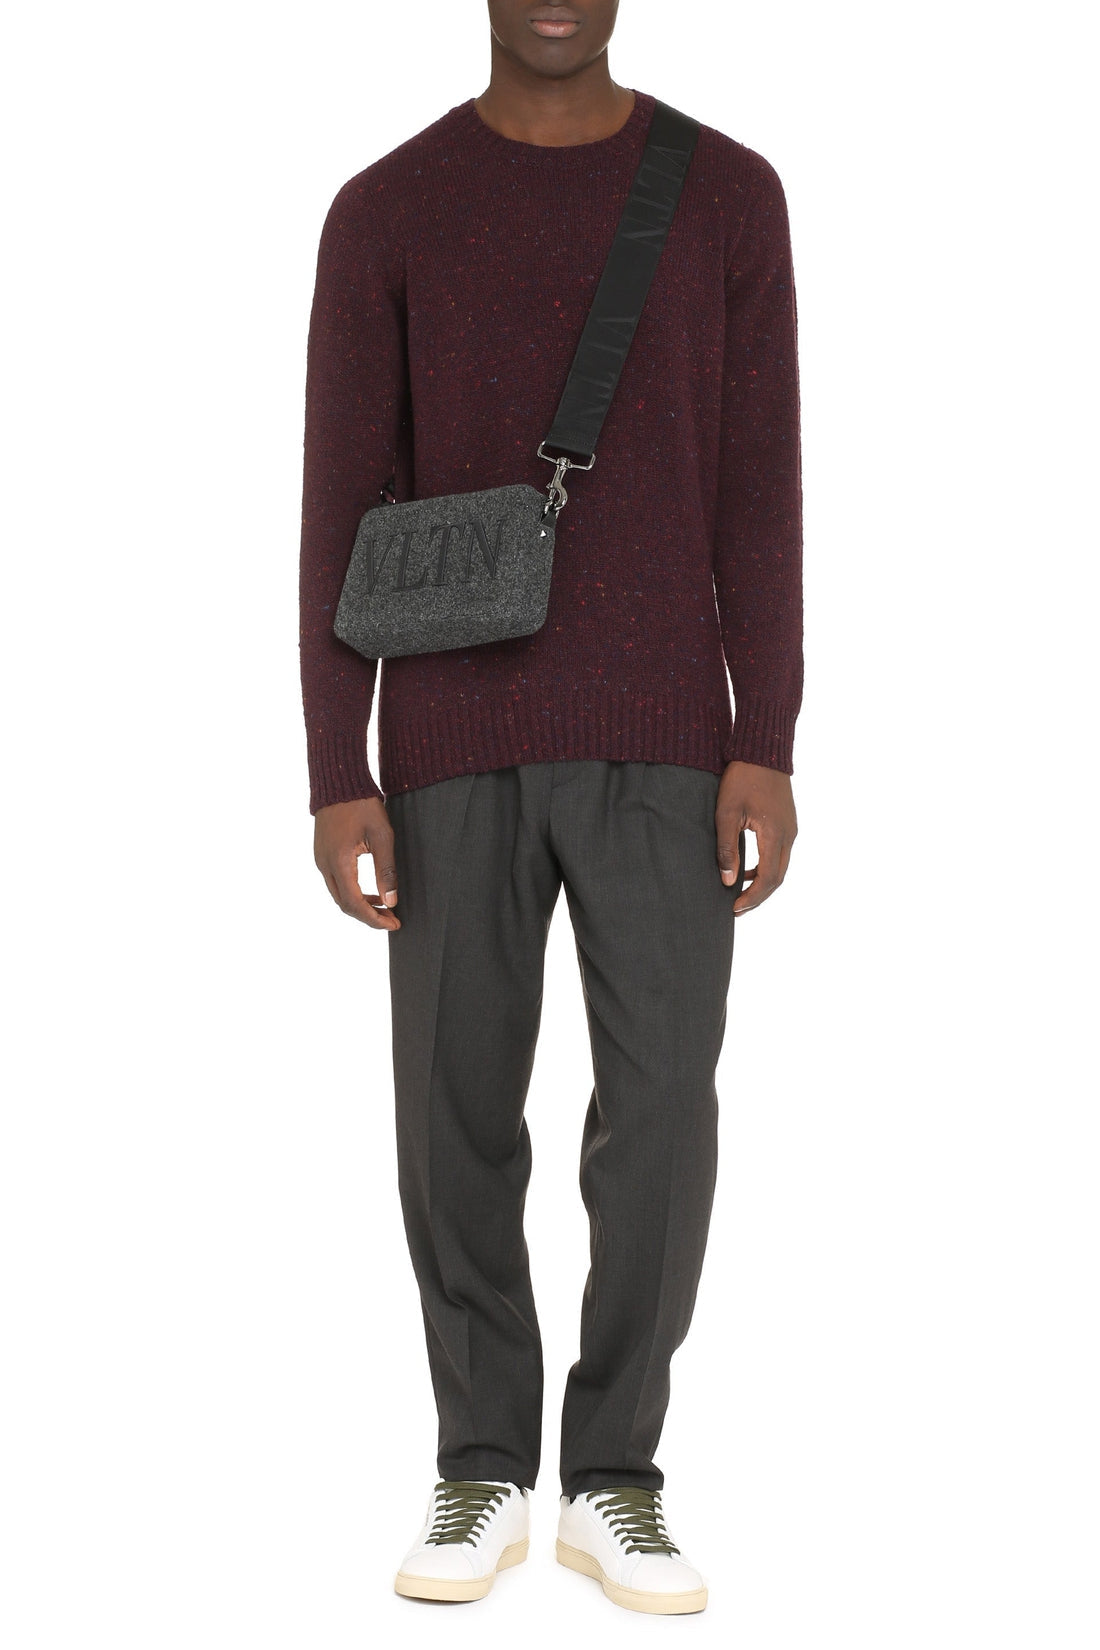 Piralo-OUTLET-SALE-Wool and cashmere sweater-ARCHIVIST